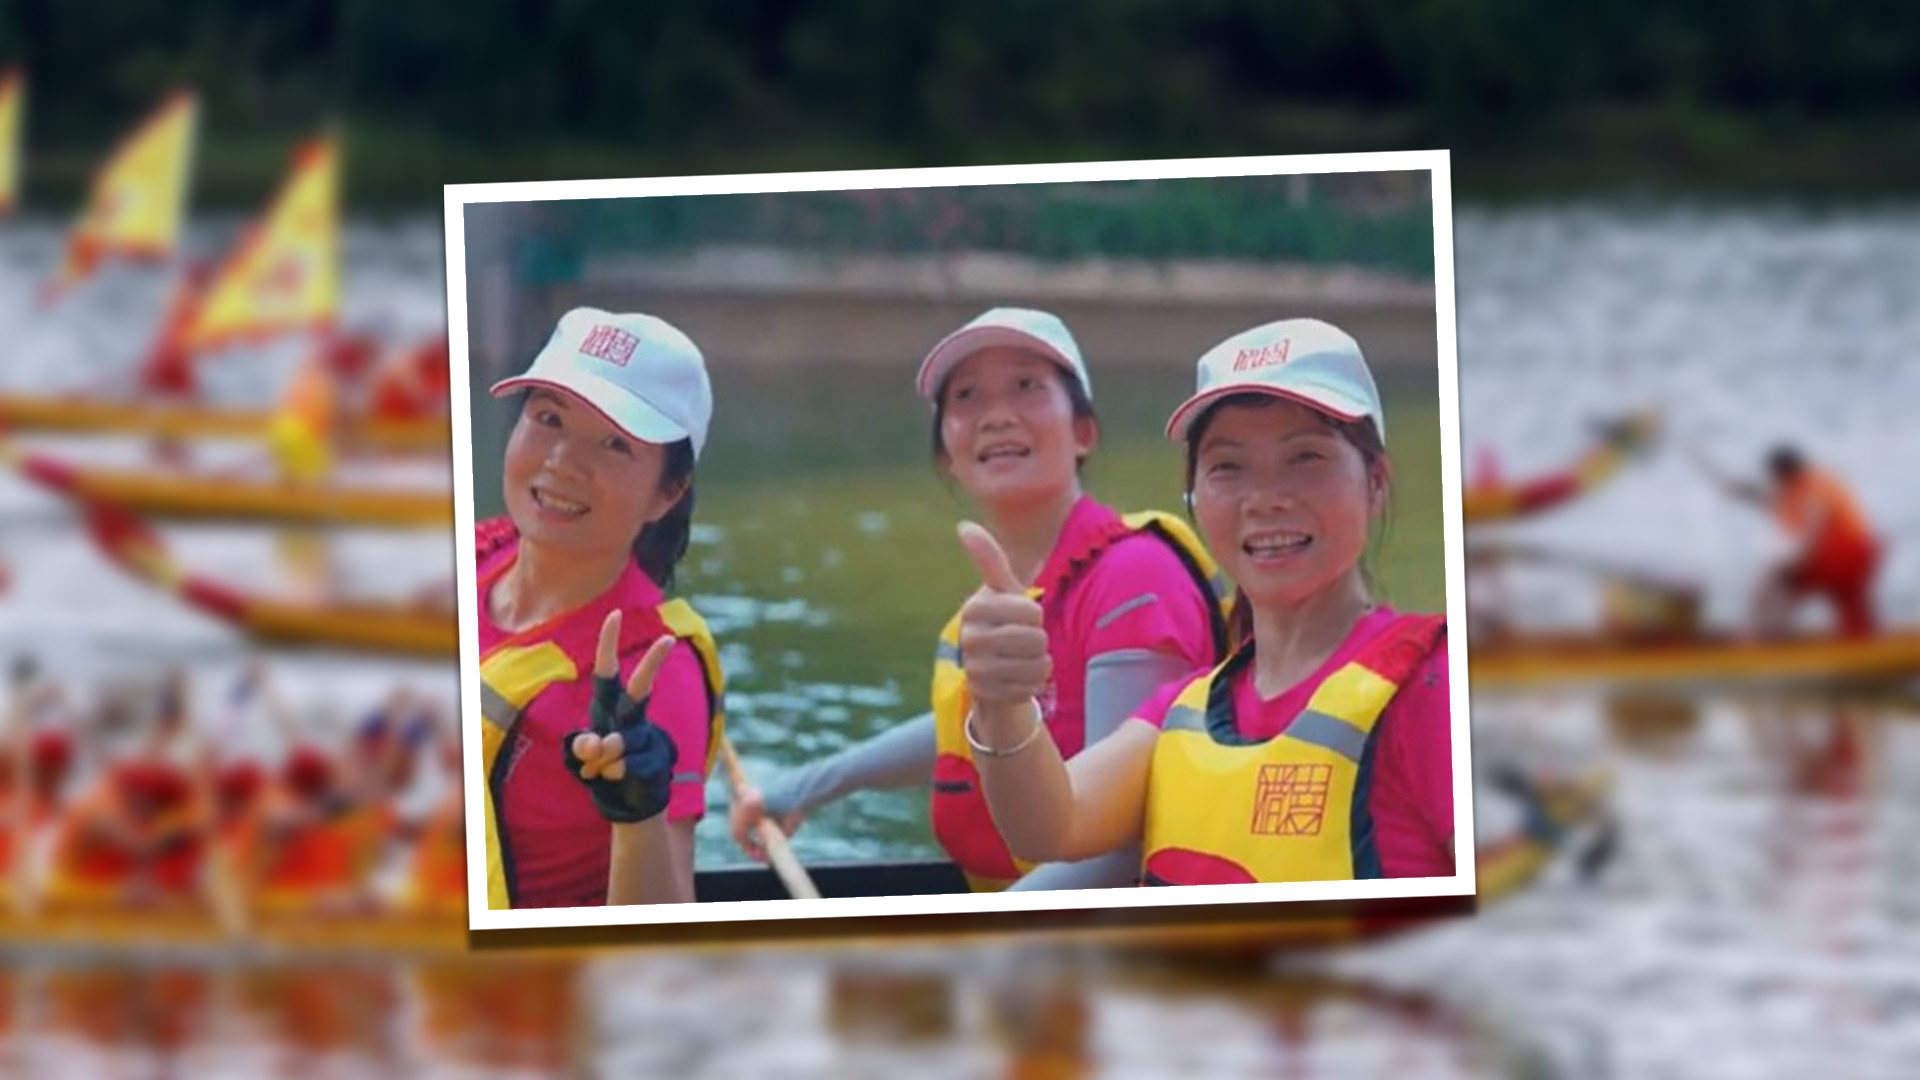 Tradition is being challenged in the historically male-dominated sport of dragon boat racing in China by a group of wealthy women from an urban village in the south of the country who have formed their own team. Photo: SCMP composite/Douyin